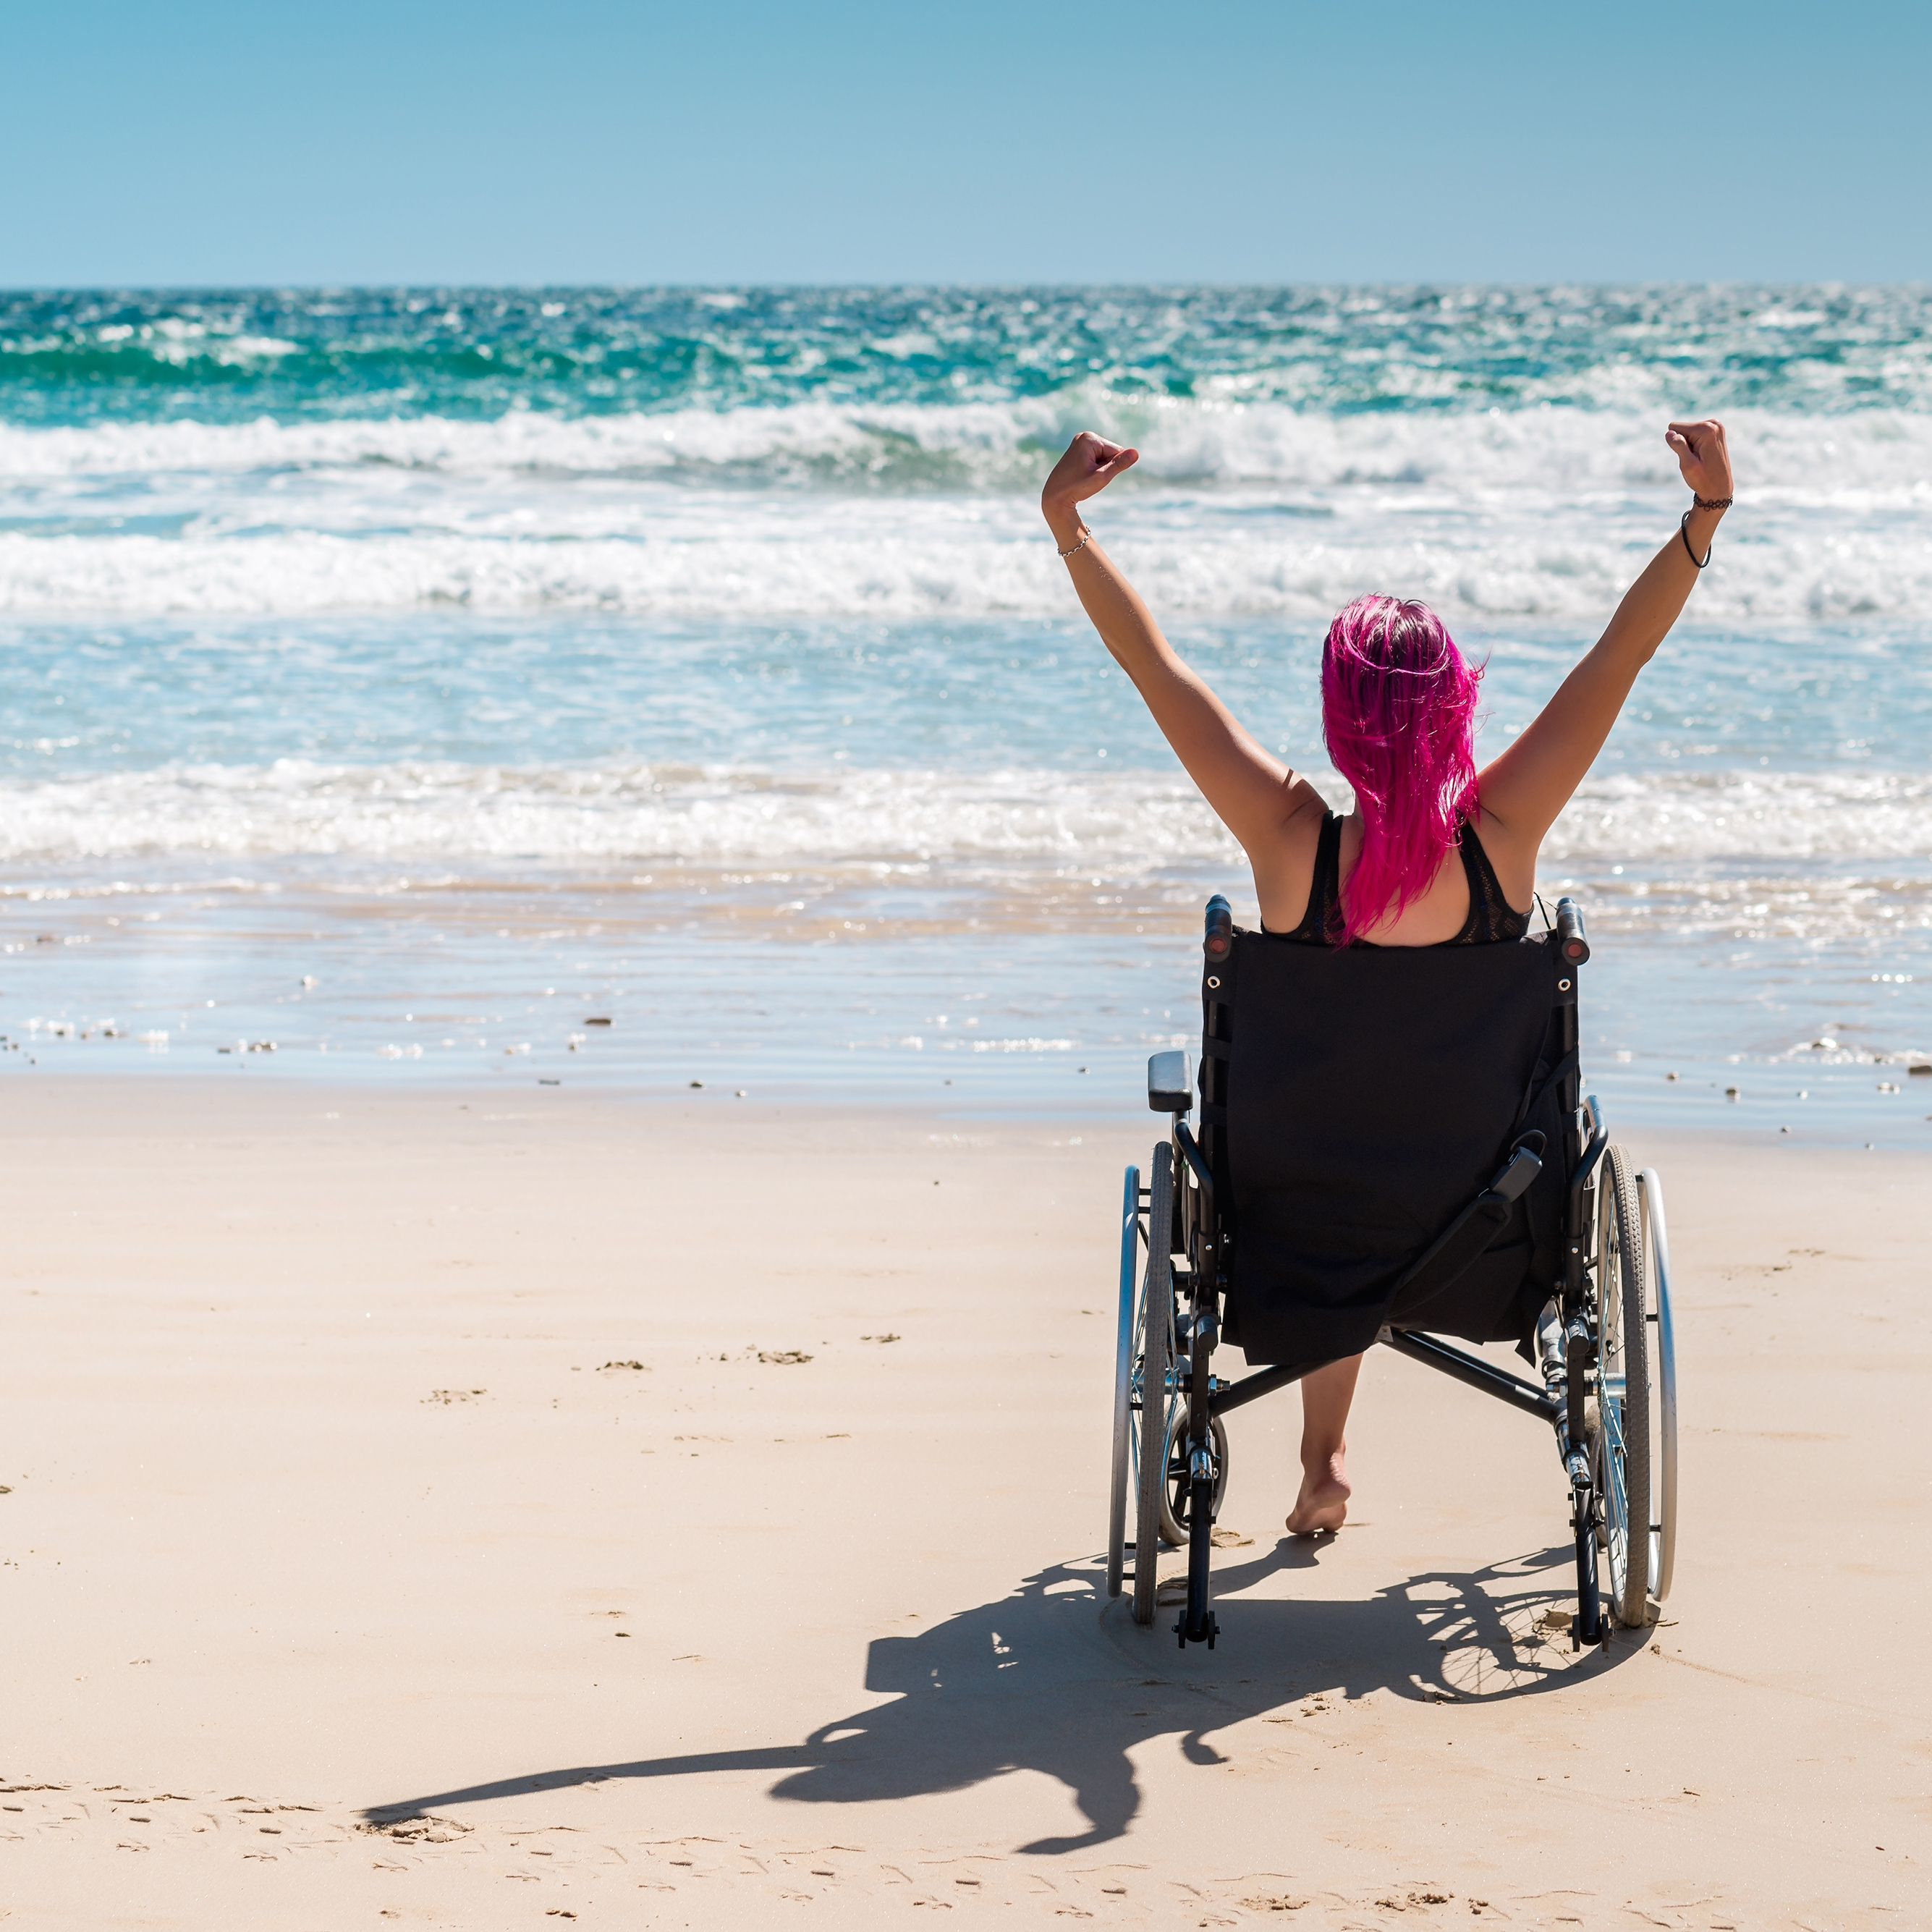 Disabled woman in a wheelchair on the beach.